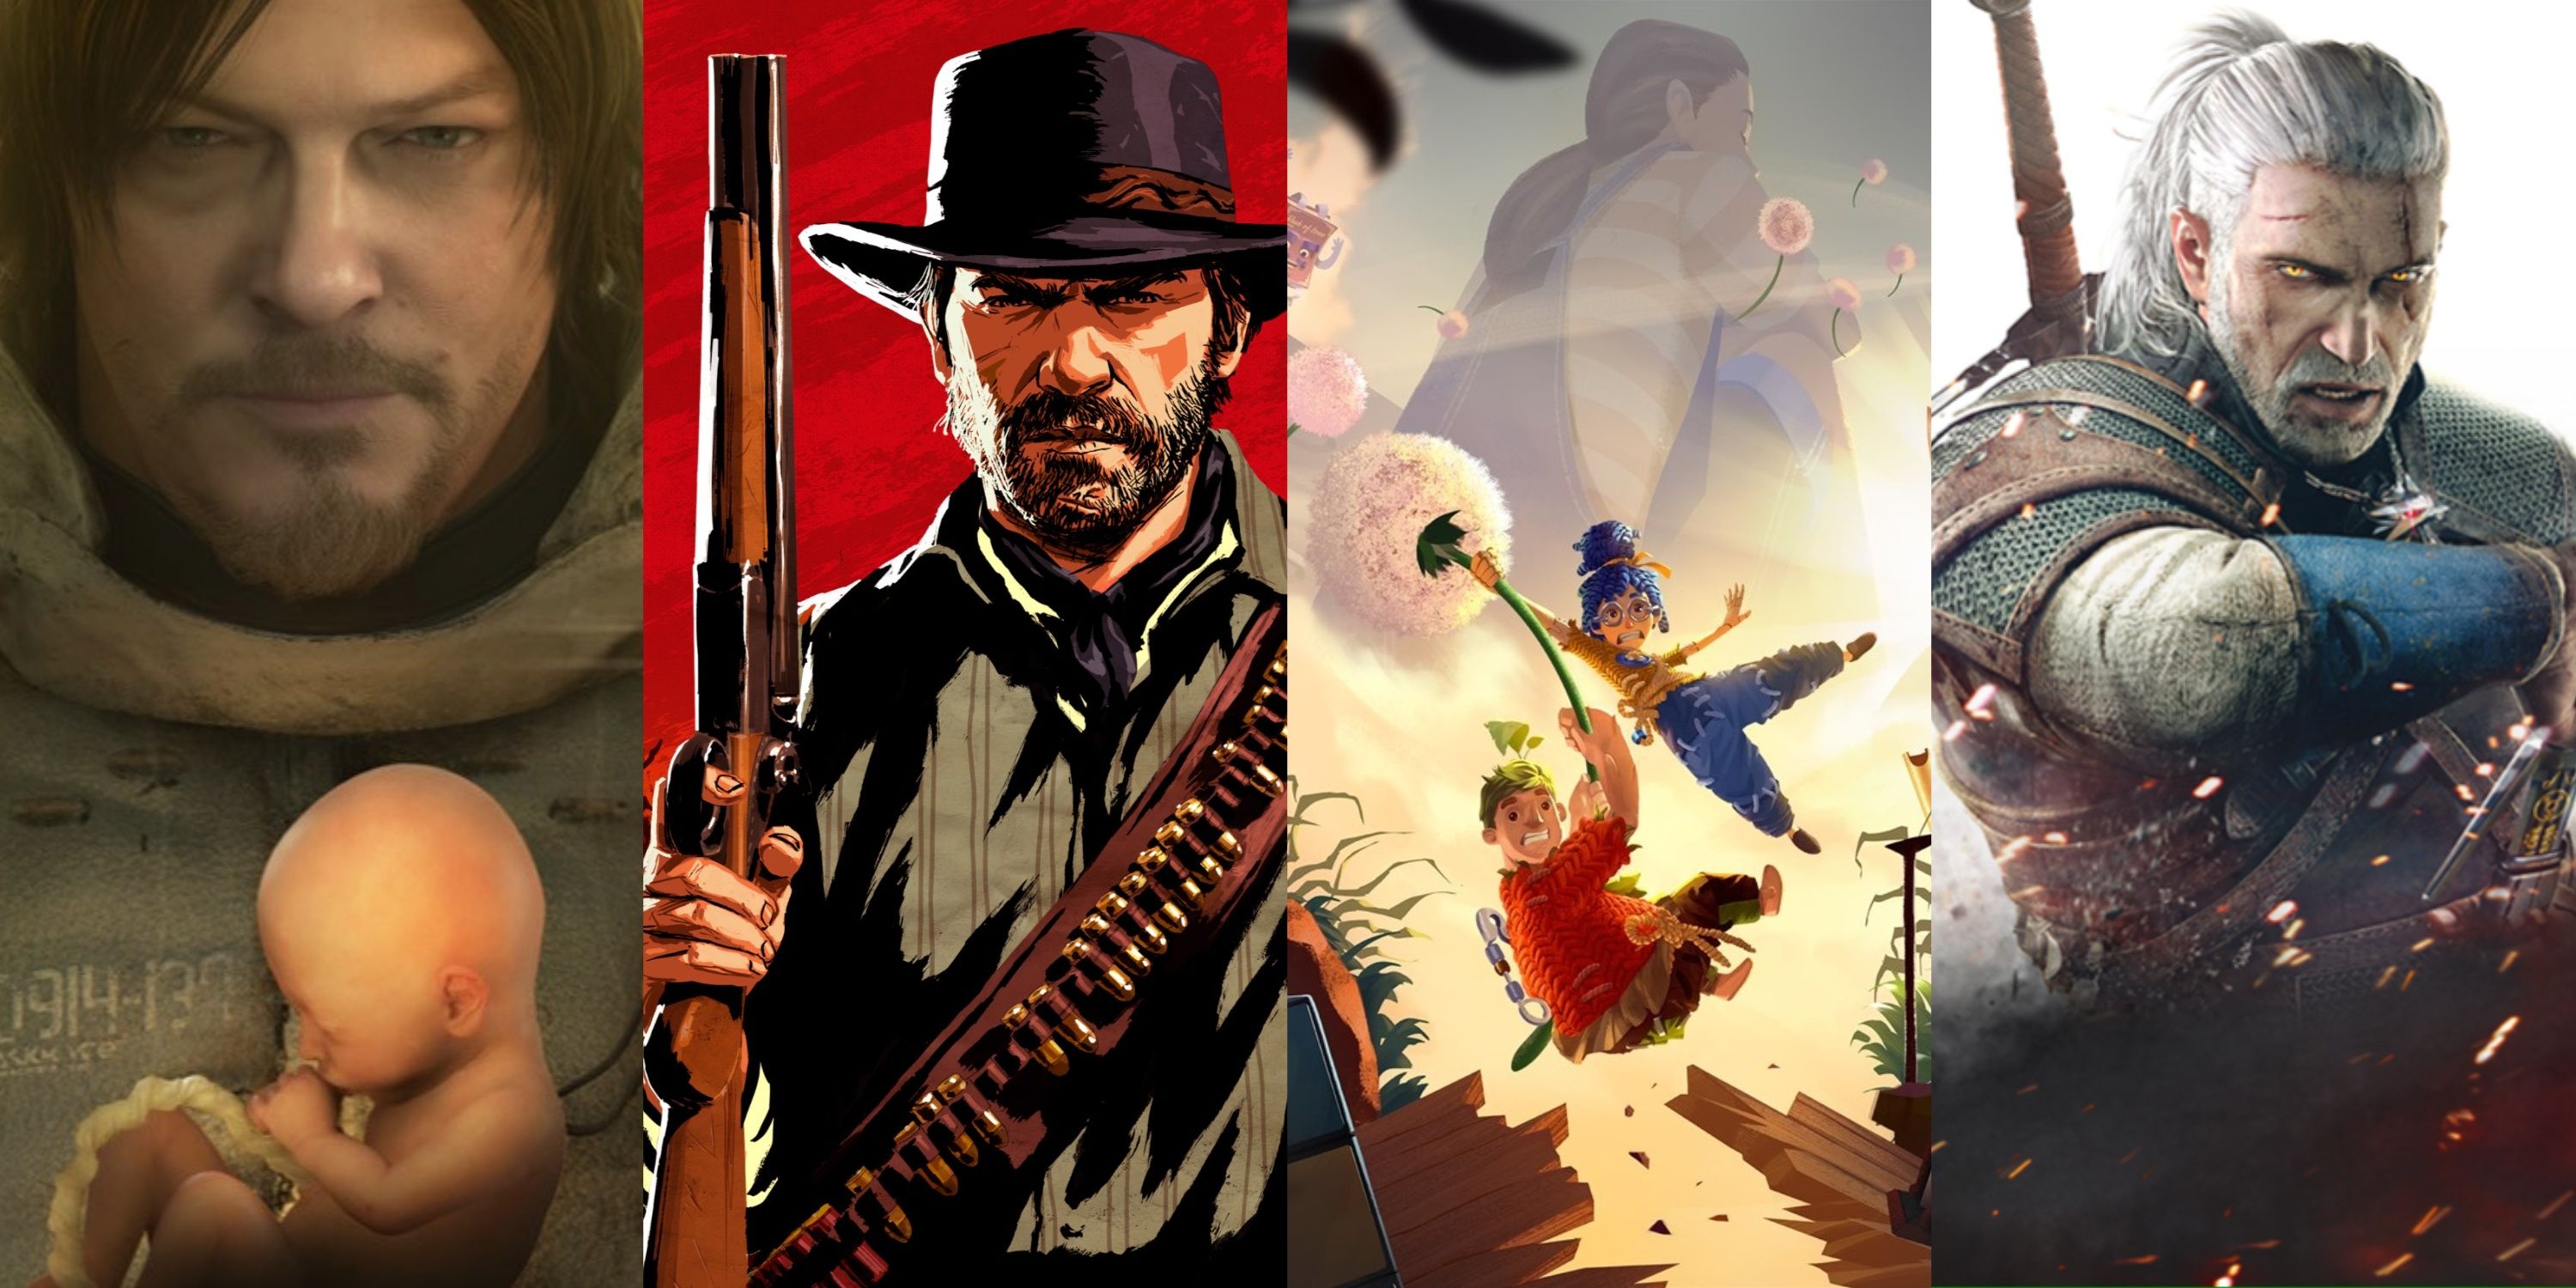 10 weirdest moments in recent video games - Sam Porter Bridgers, Arthur Morgan, May and Cody, and Geralt